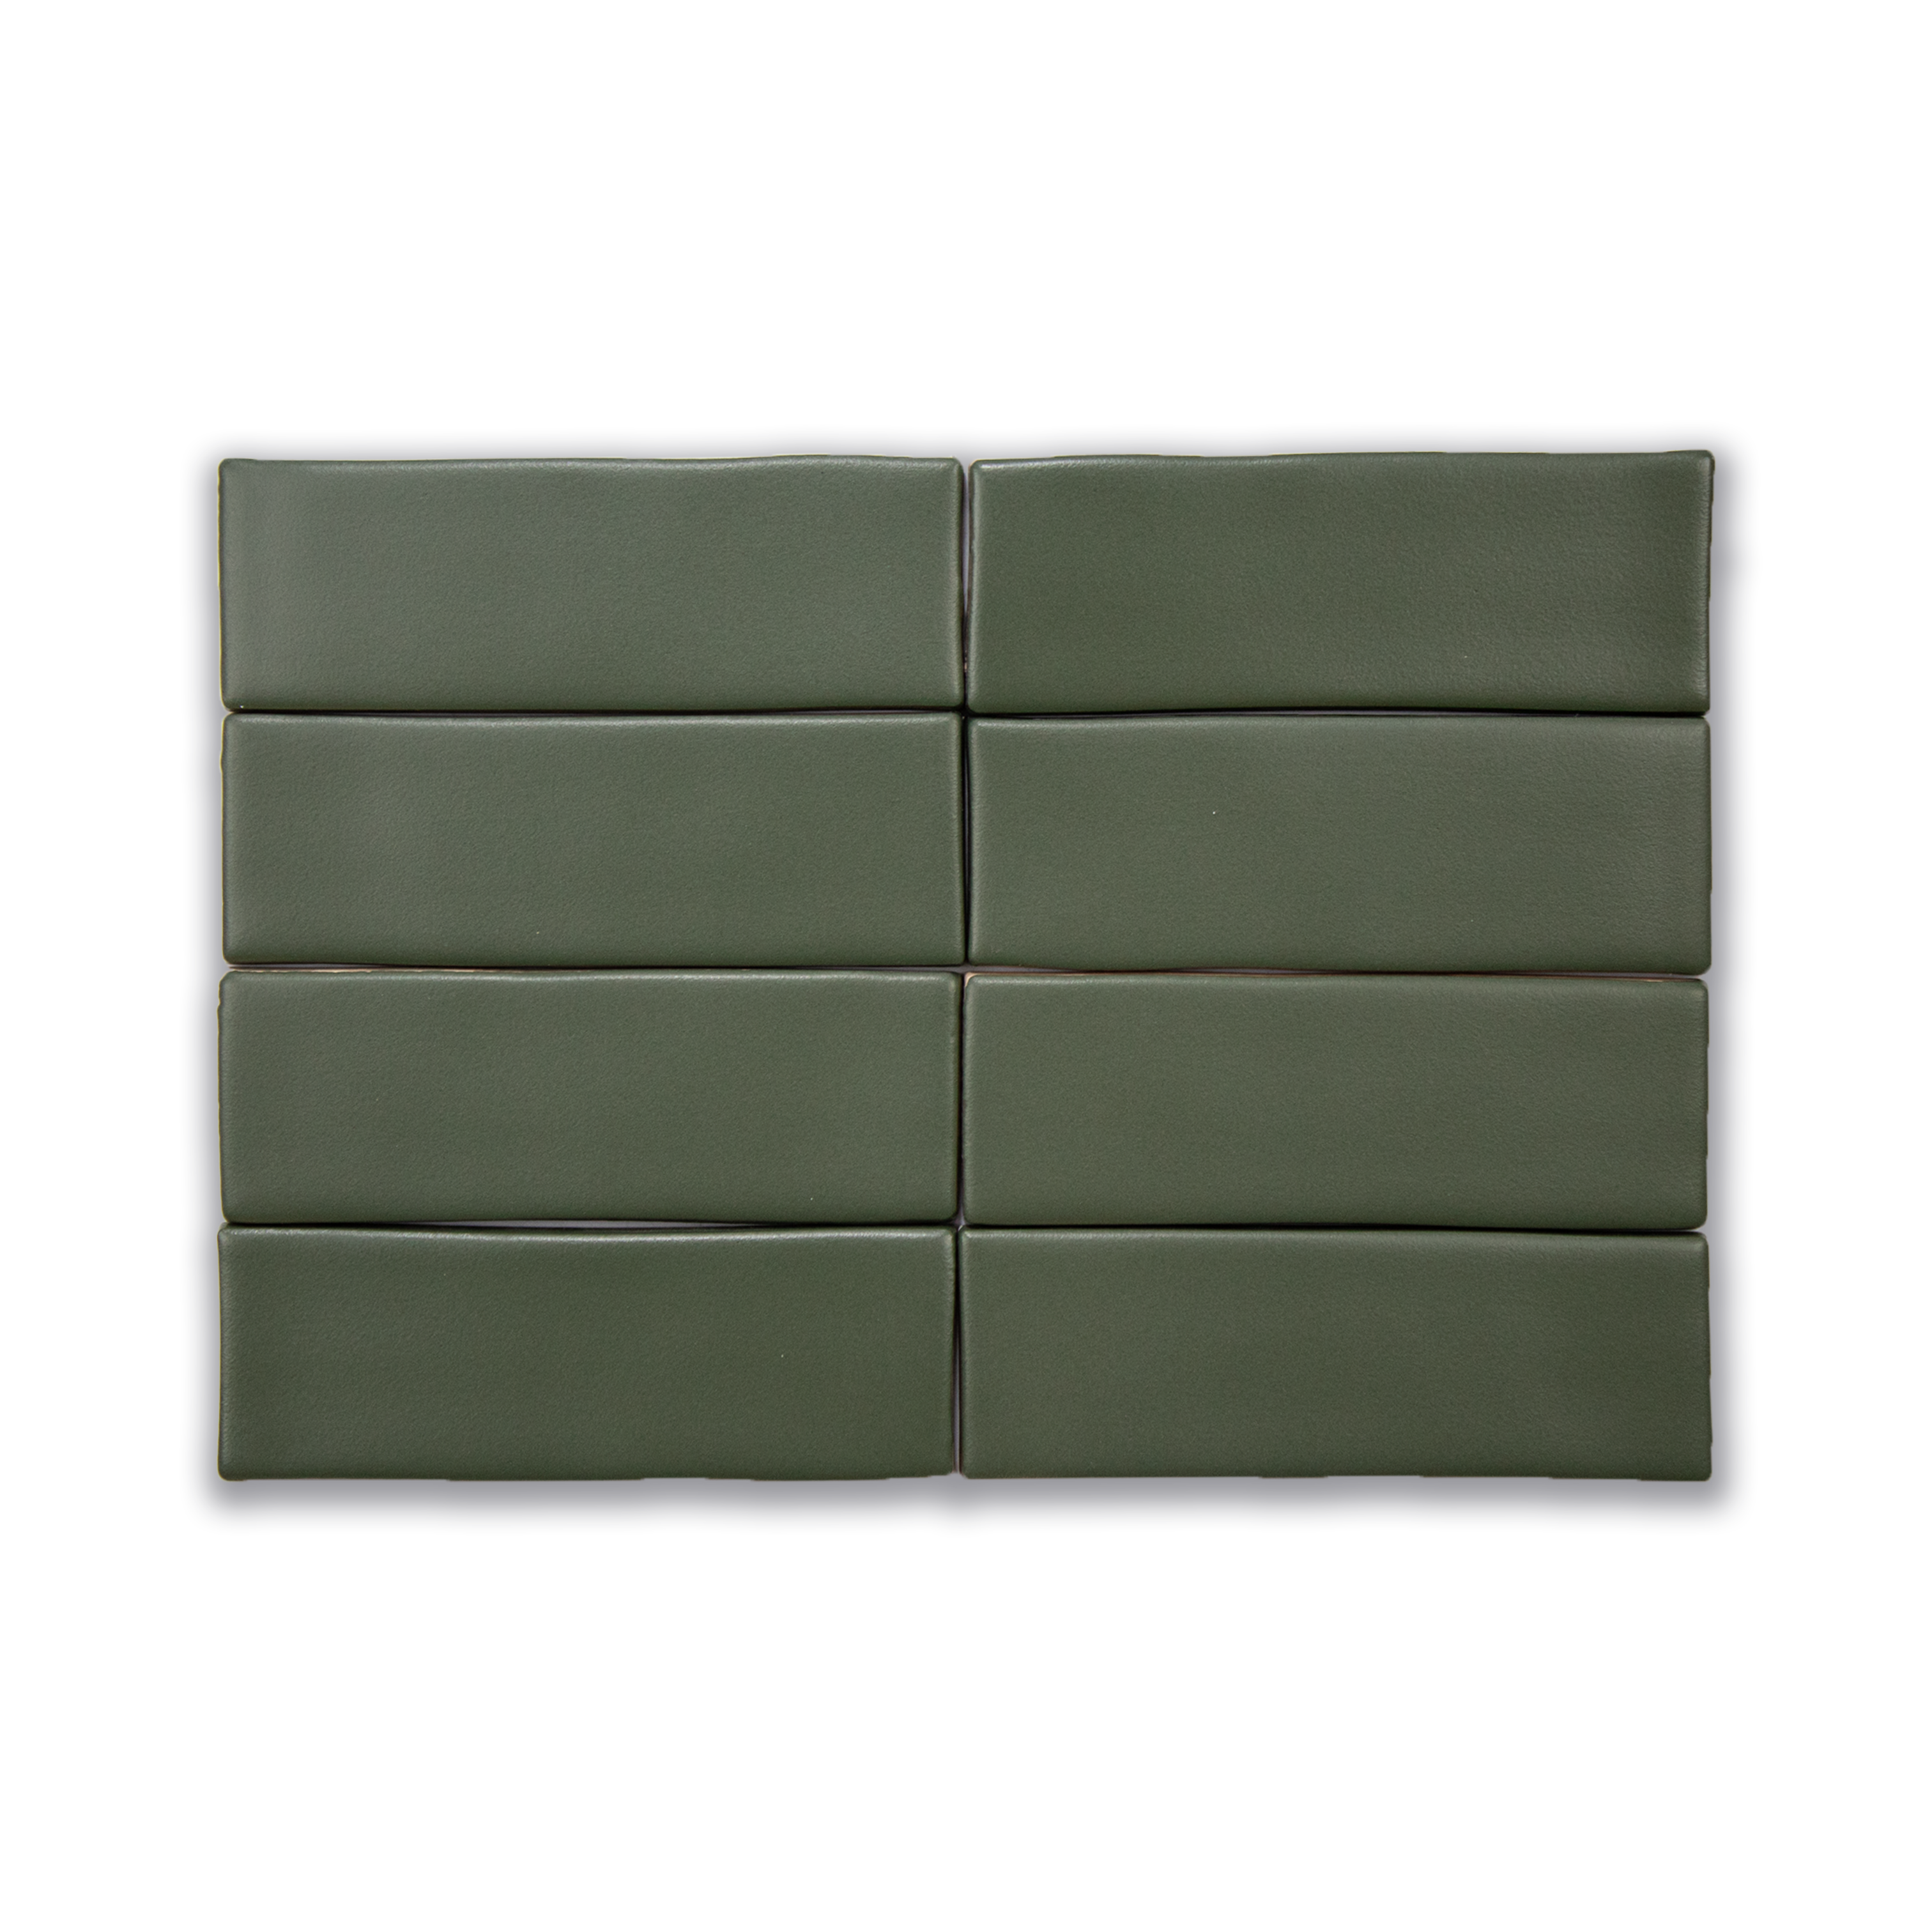 Extruded Handmade 2x6 Olive Drab Green Matte Subway Tile